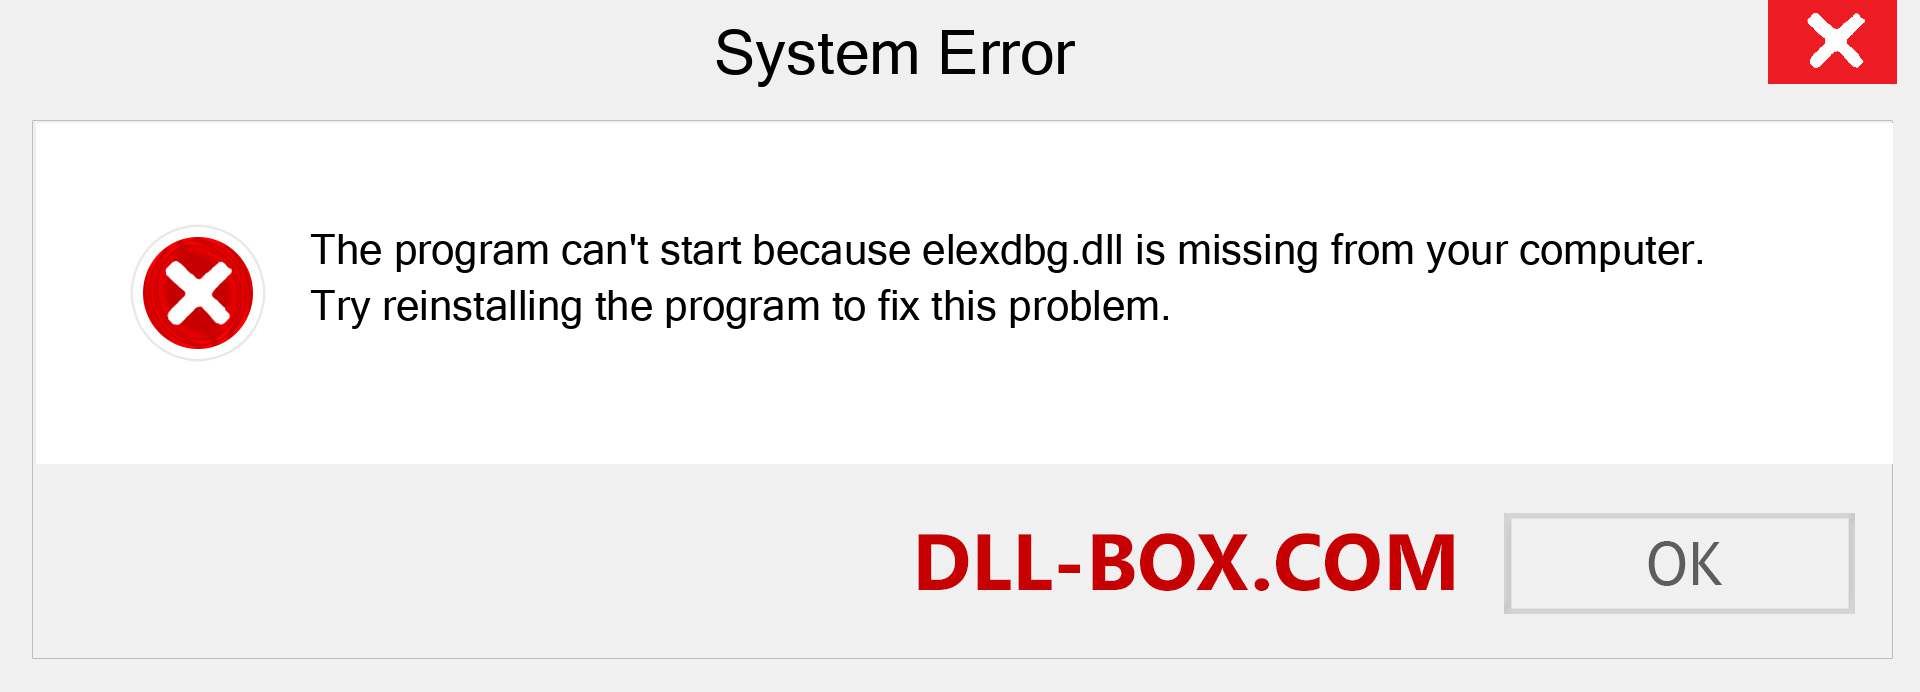  elexdbg.dll file is missing?. Download for Windows 7, 8, 10 - Fix  elexdbg dll Missing Error on Windows, photos, images